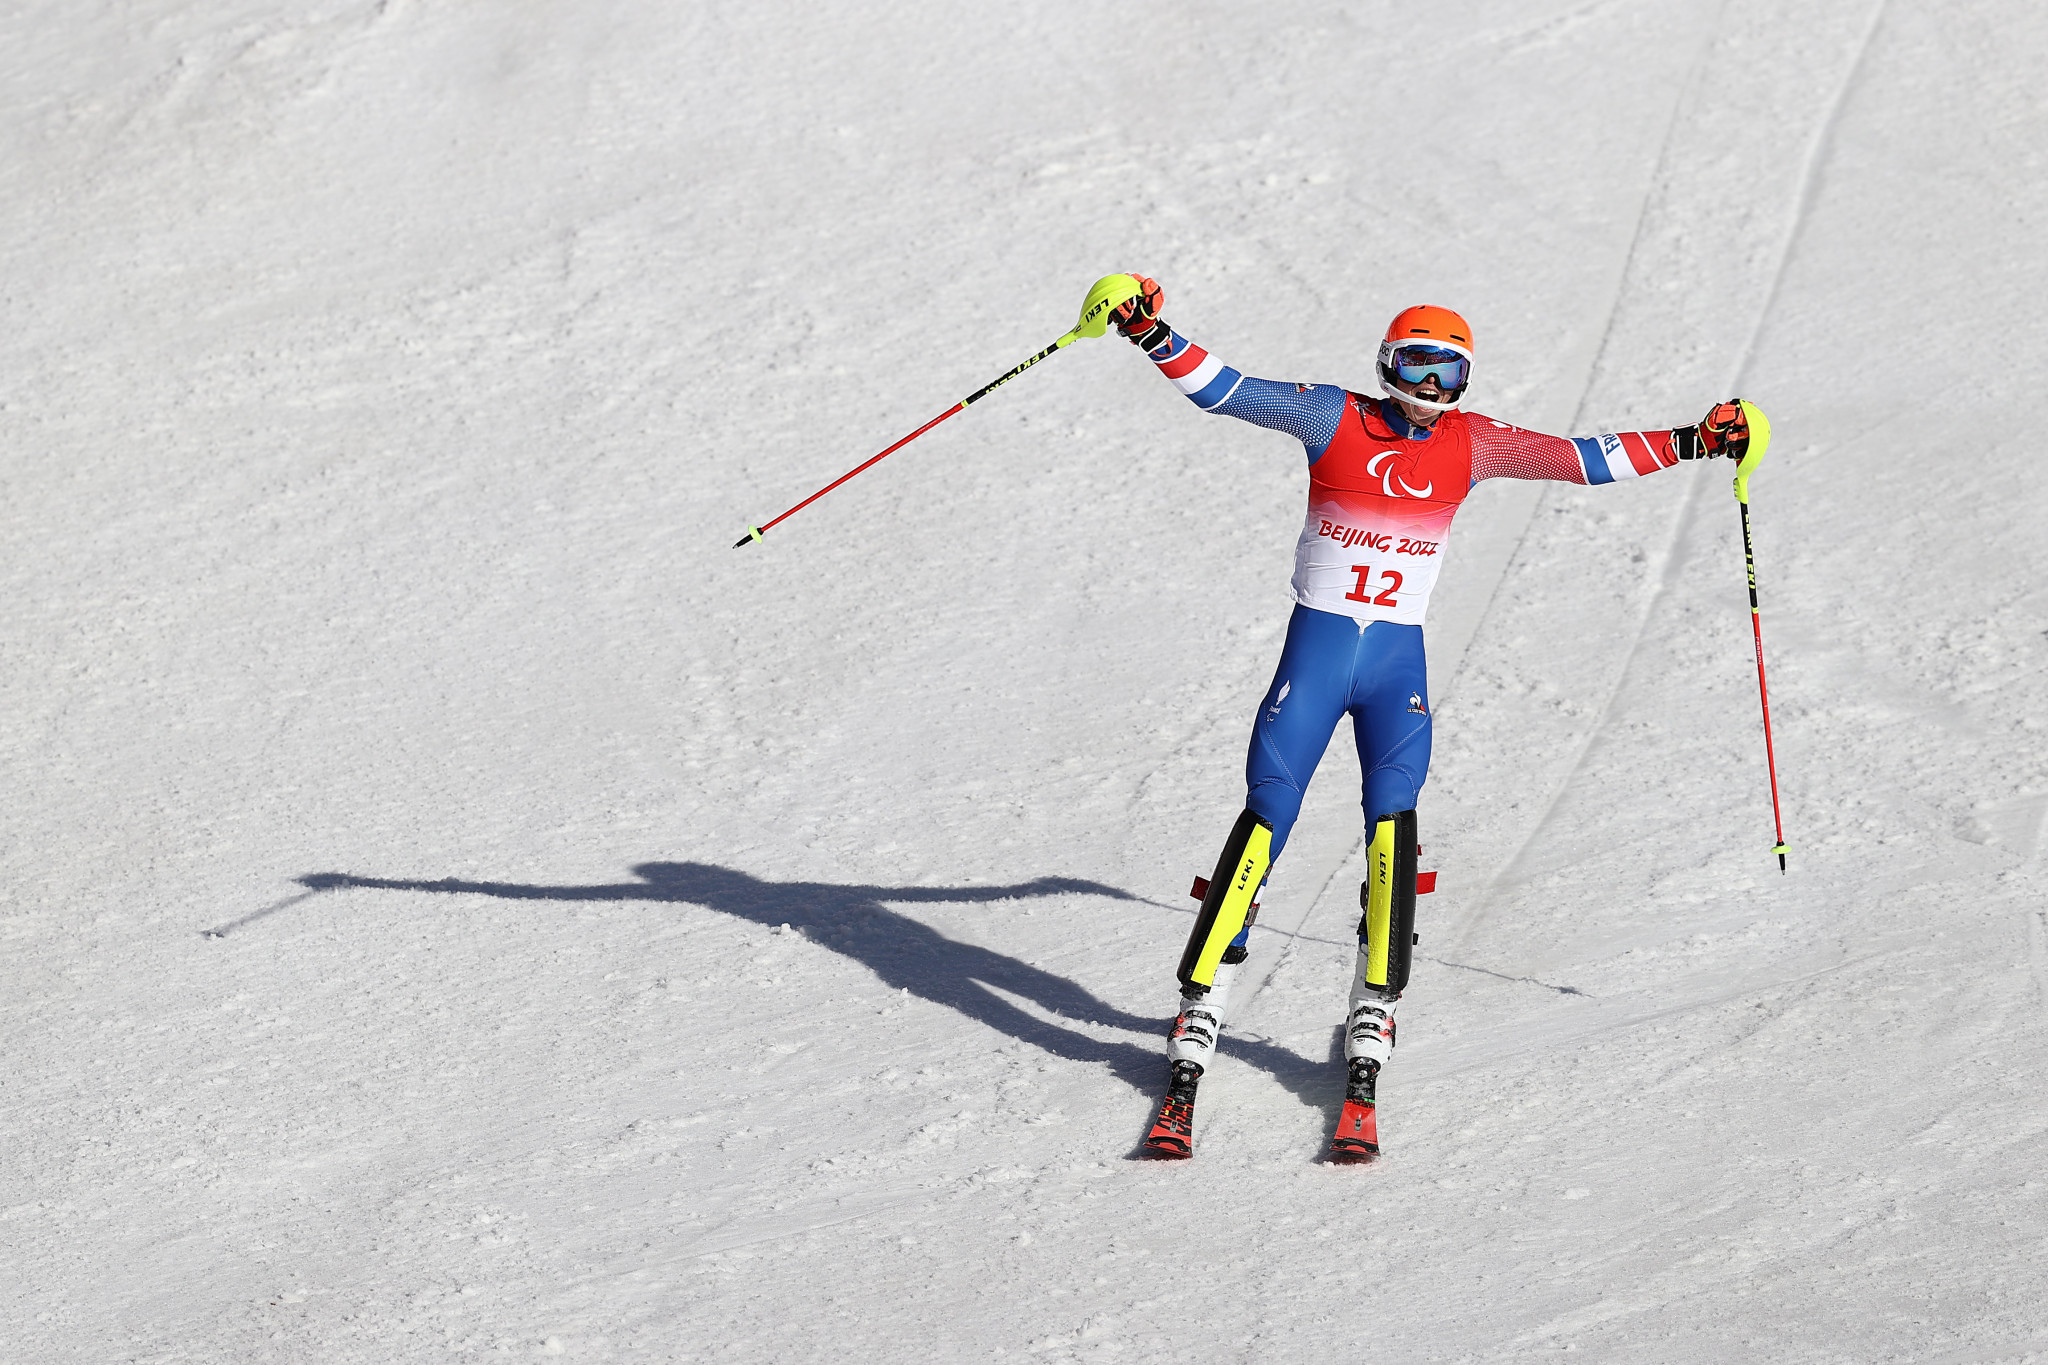 France's Arthur Bauchet dominated the men's super combined standing, winning his second gold of Beijing 2022 by more than four seconds ©Getty Images